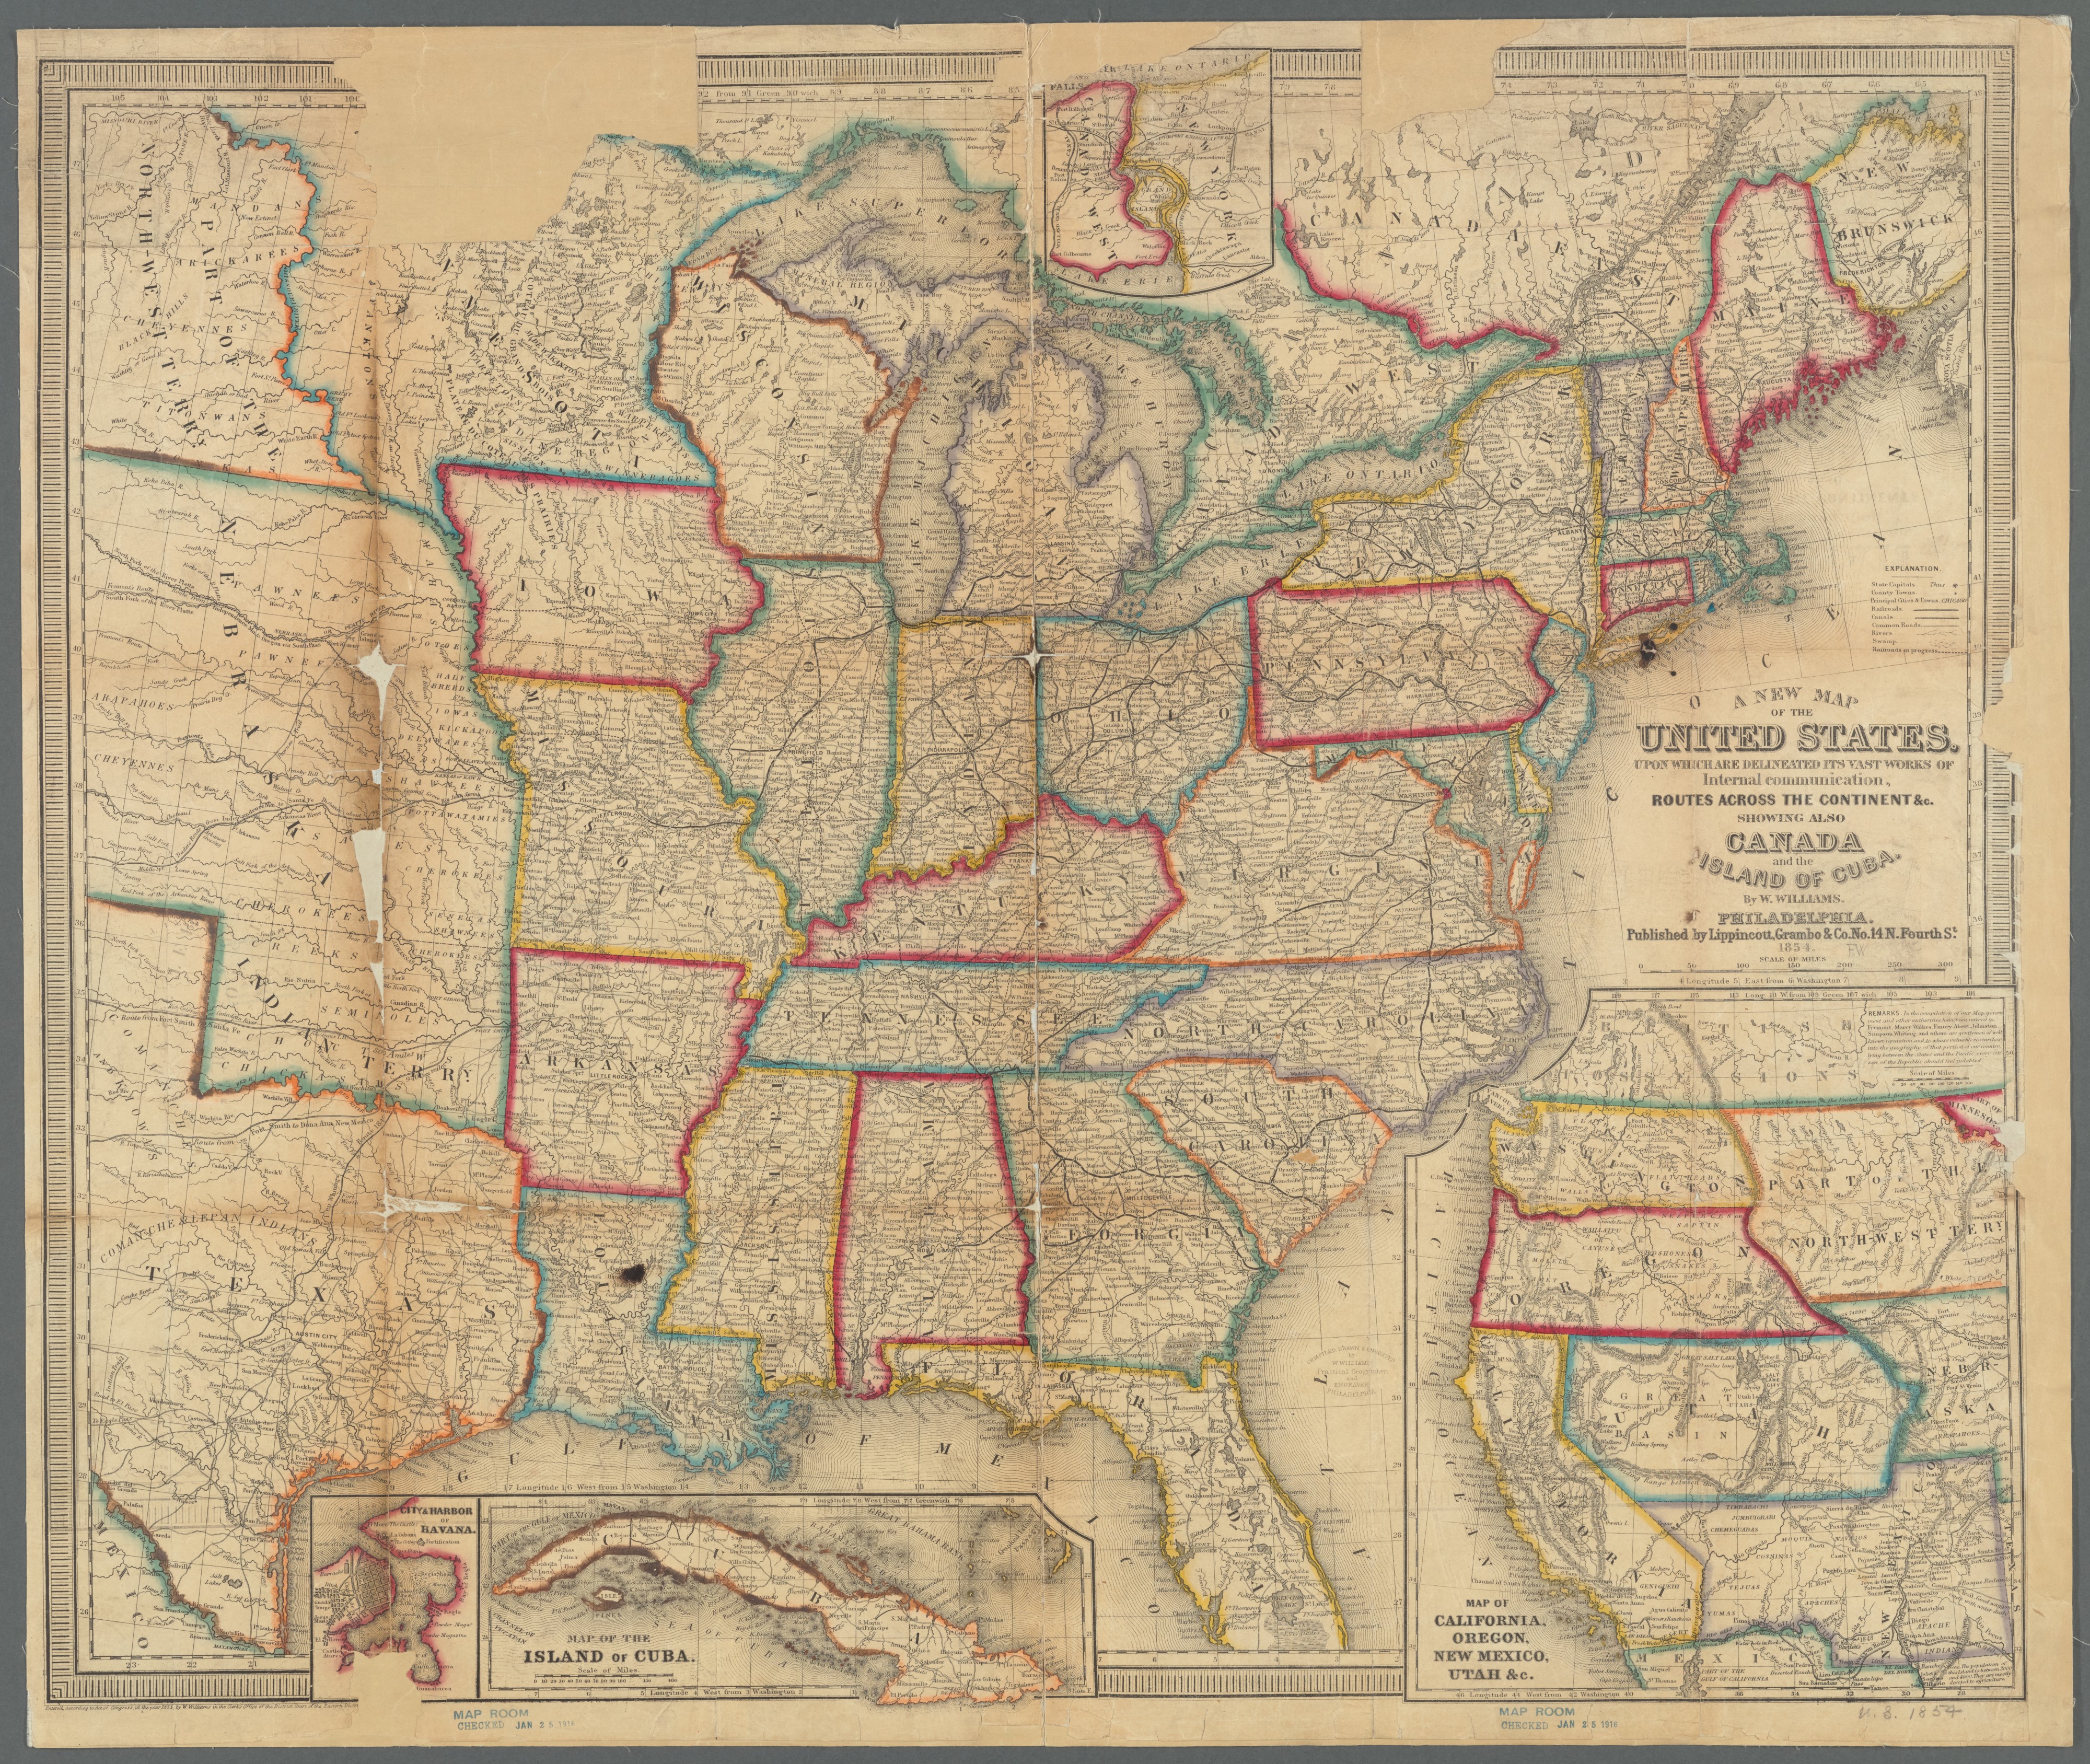 A new map of the United States, upon which are delineated its vast works of internal communication, routes across the continent &c (NYPL b20643904-5564108)